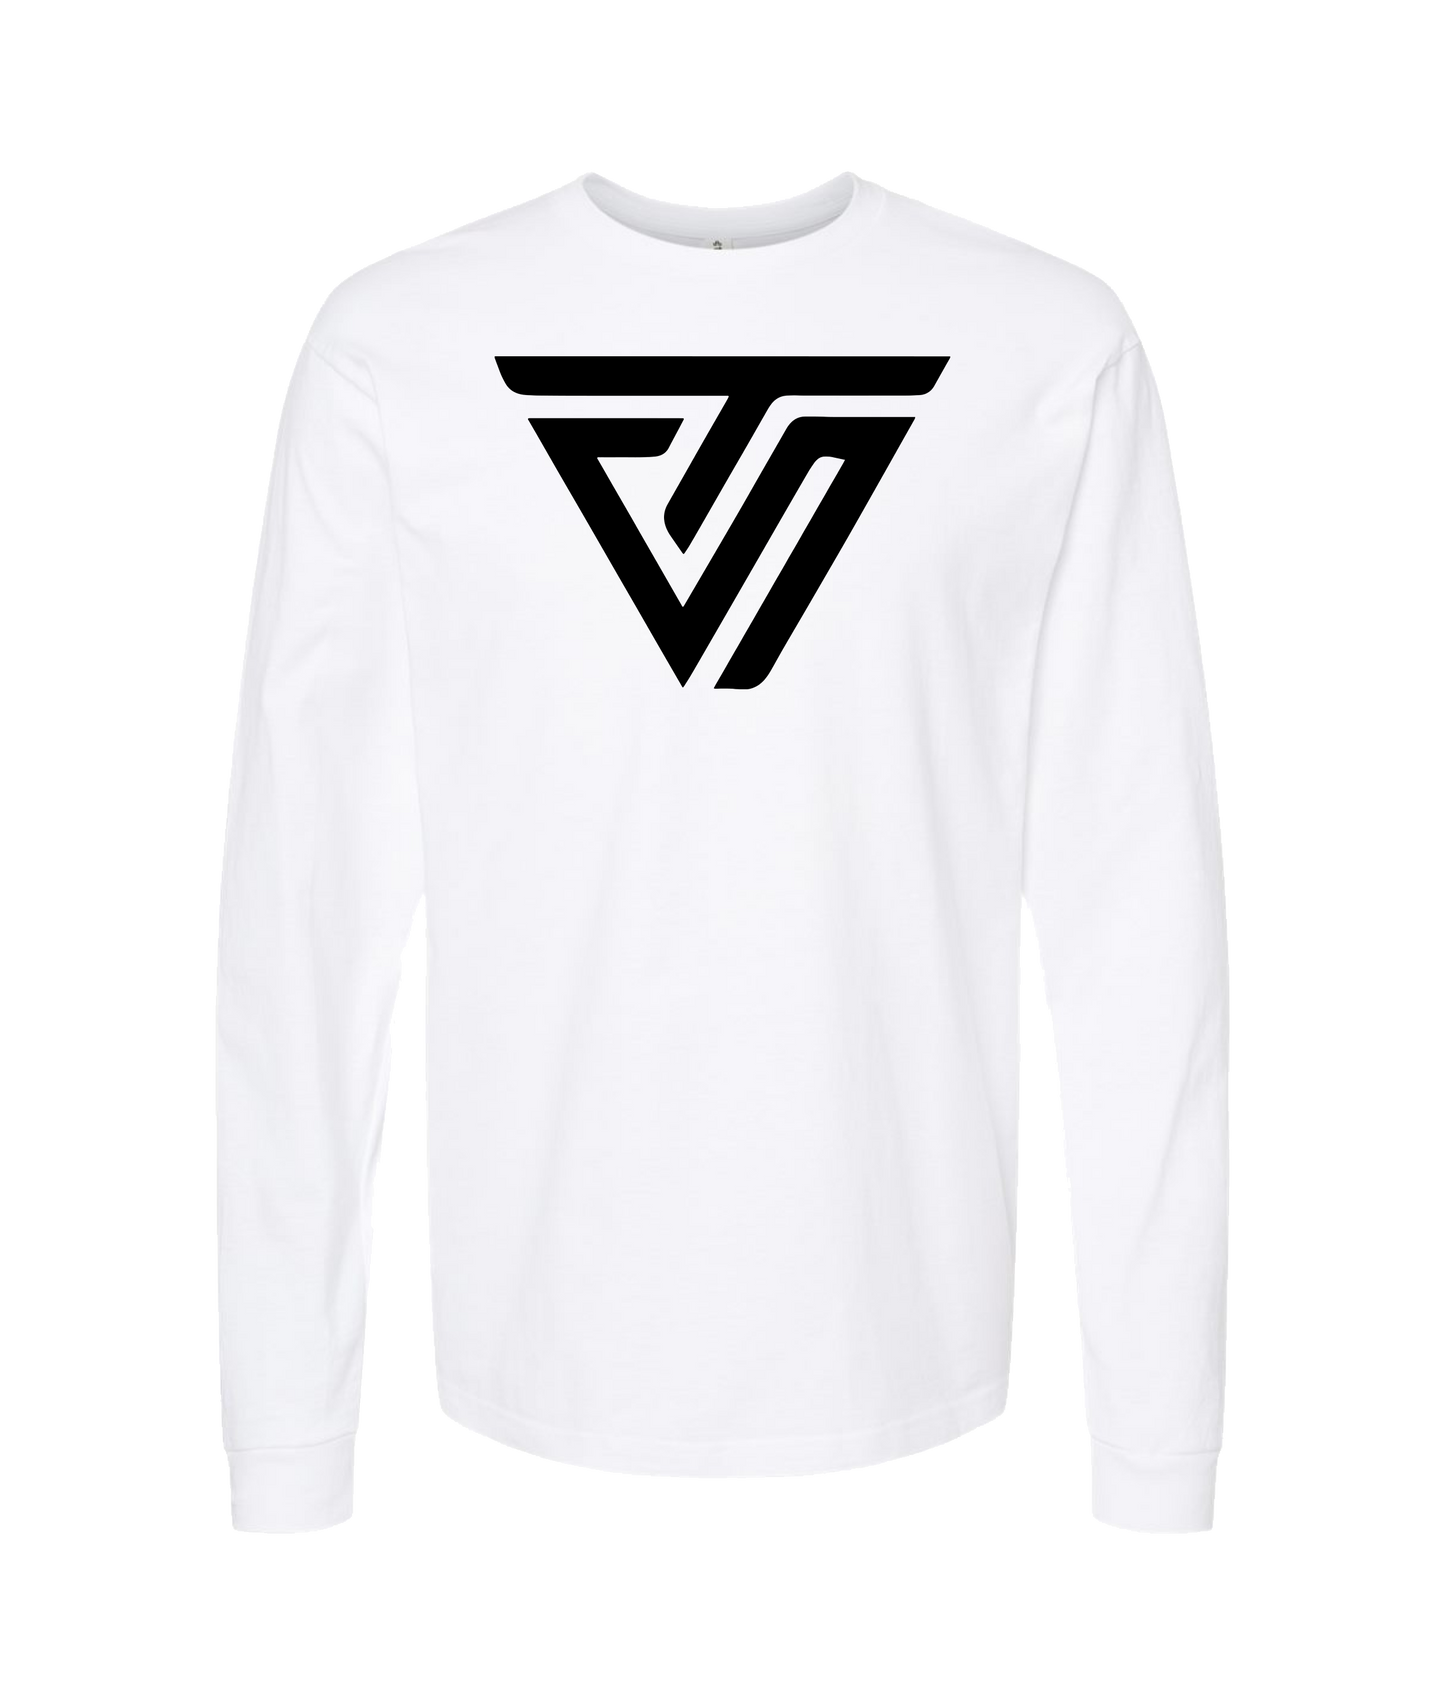 TheShift - Shift Front To Back - Black Long Sleeve T